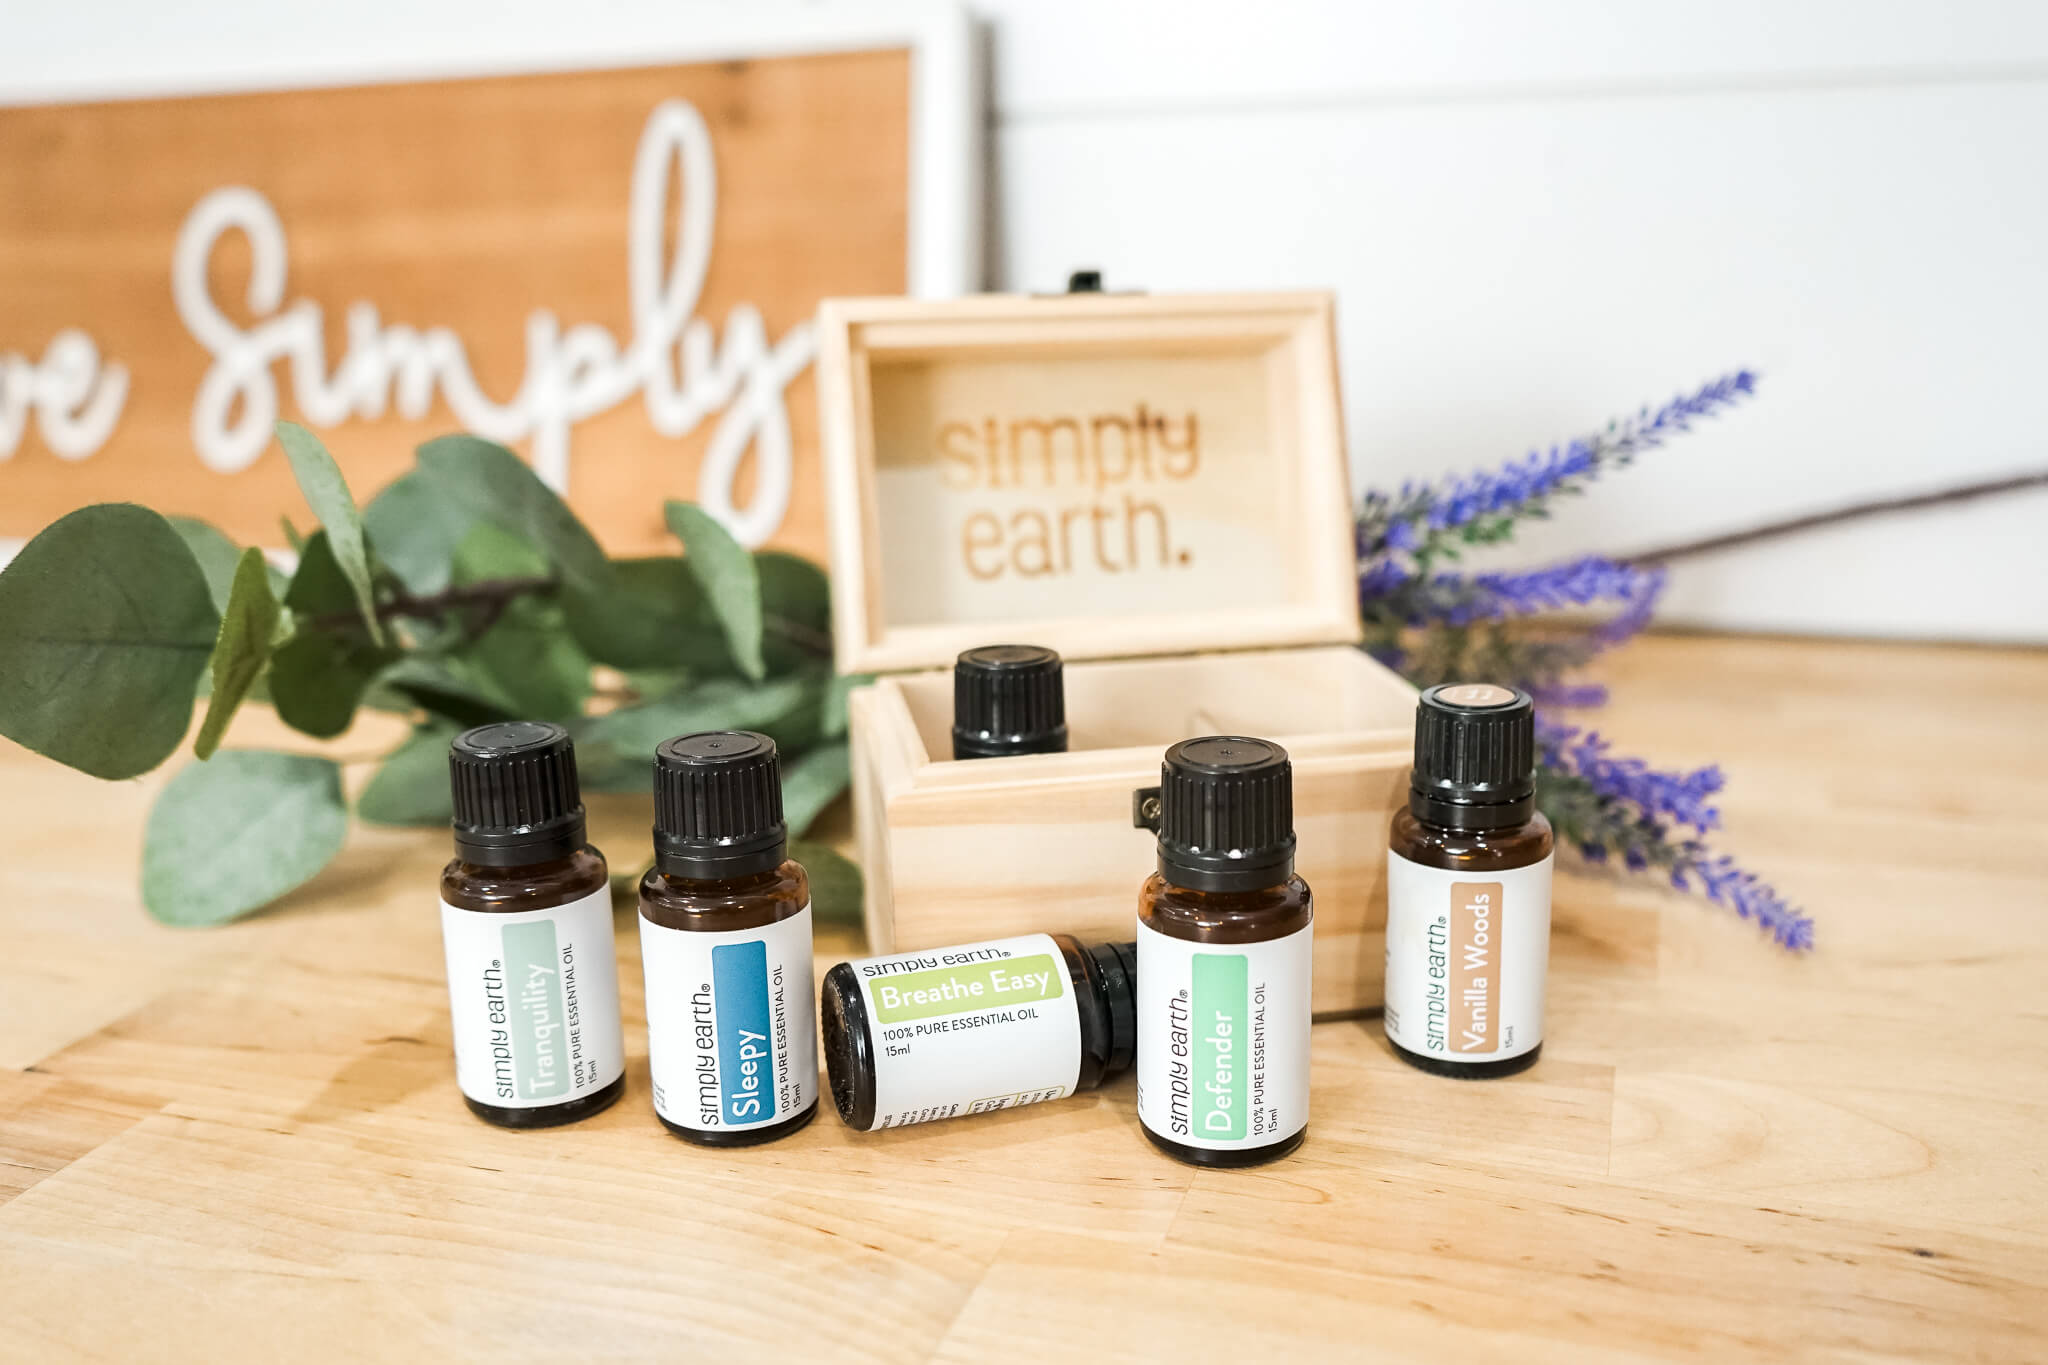 Simply Earth  Vanilla Woods Essential Oil Blend